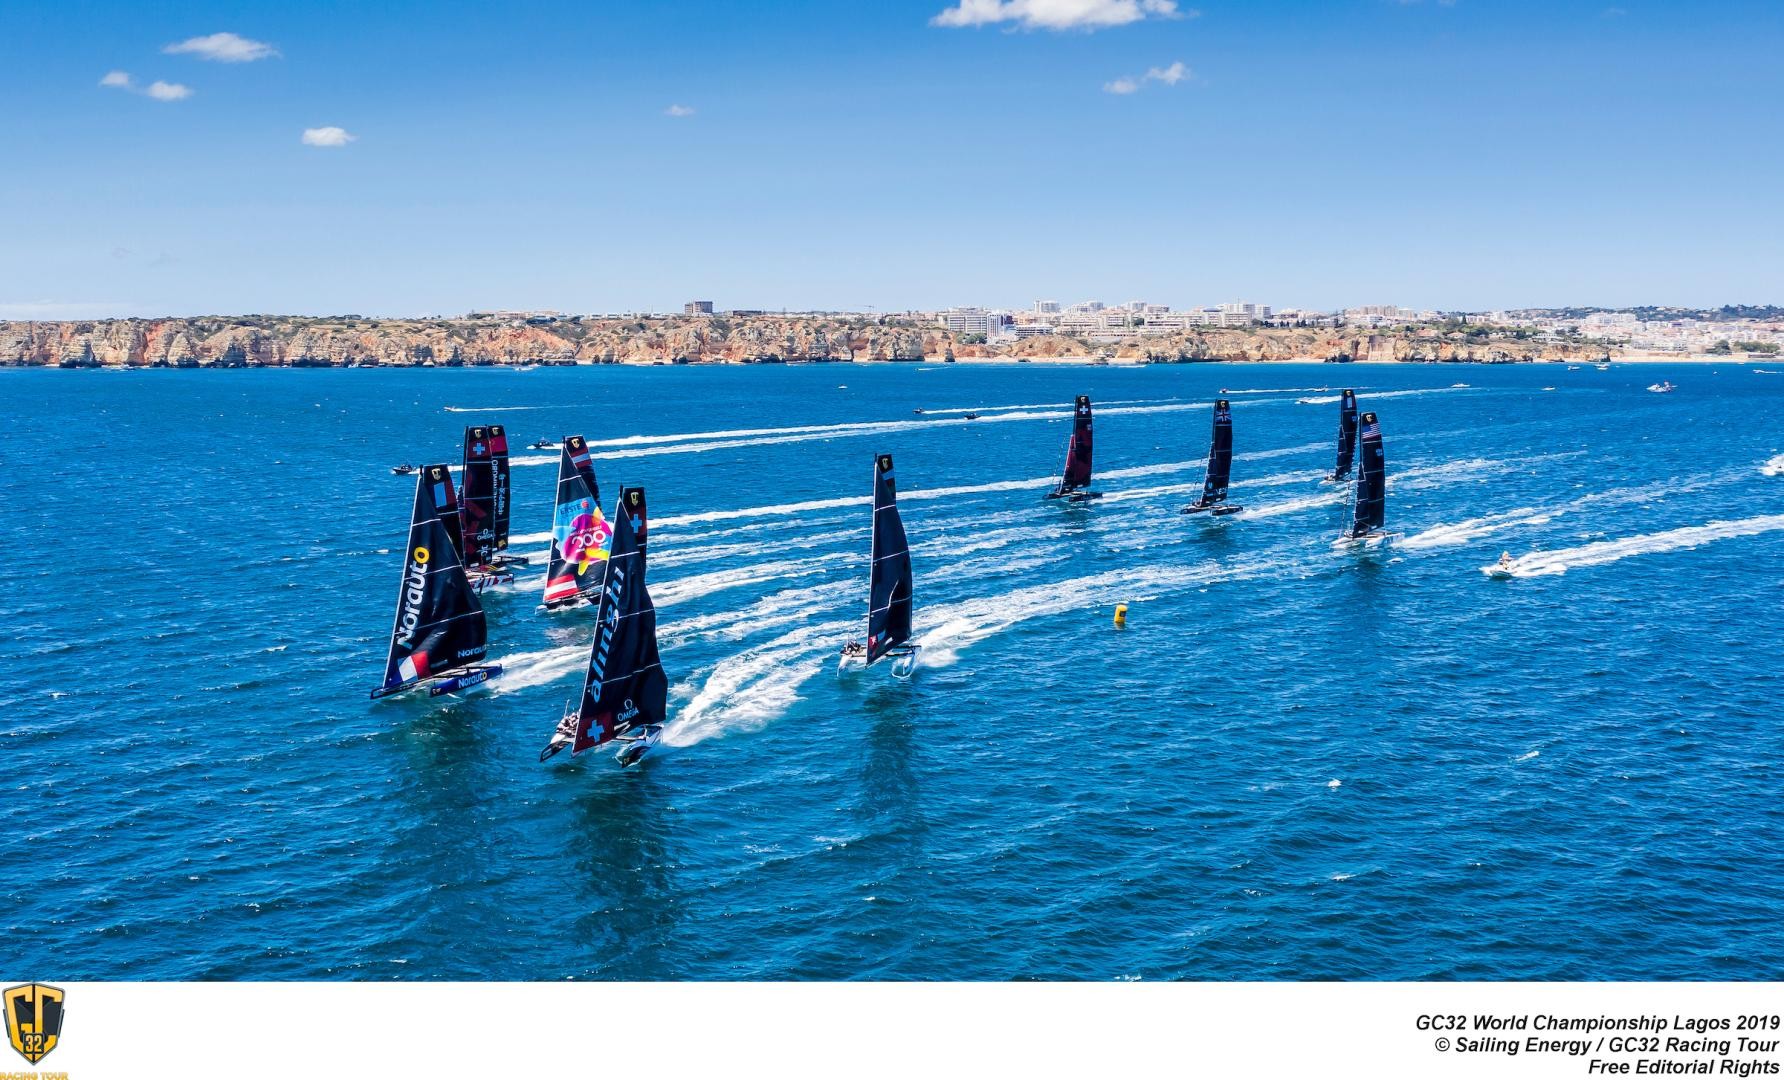 Full fleet action at the 2019 GC32 World Championship in Lagos, Portugal